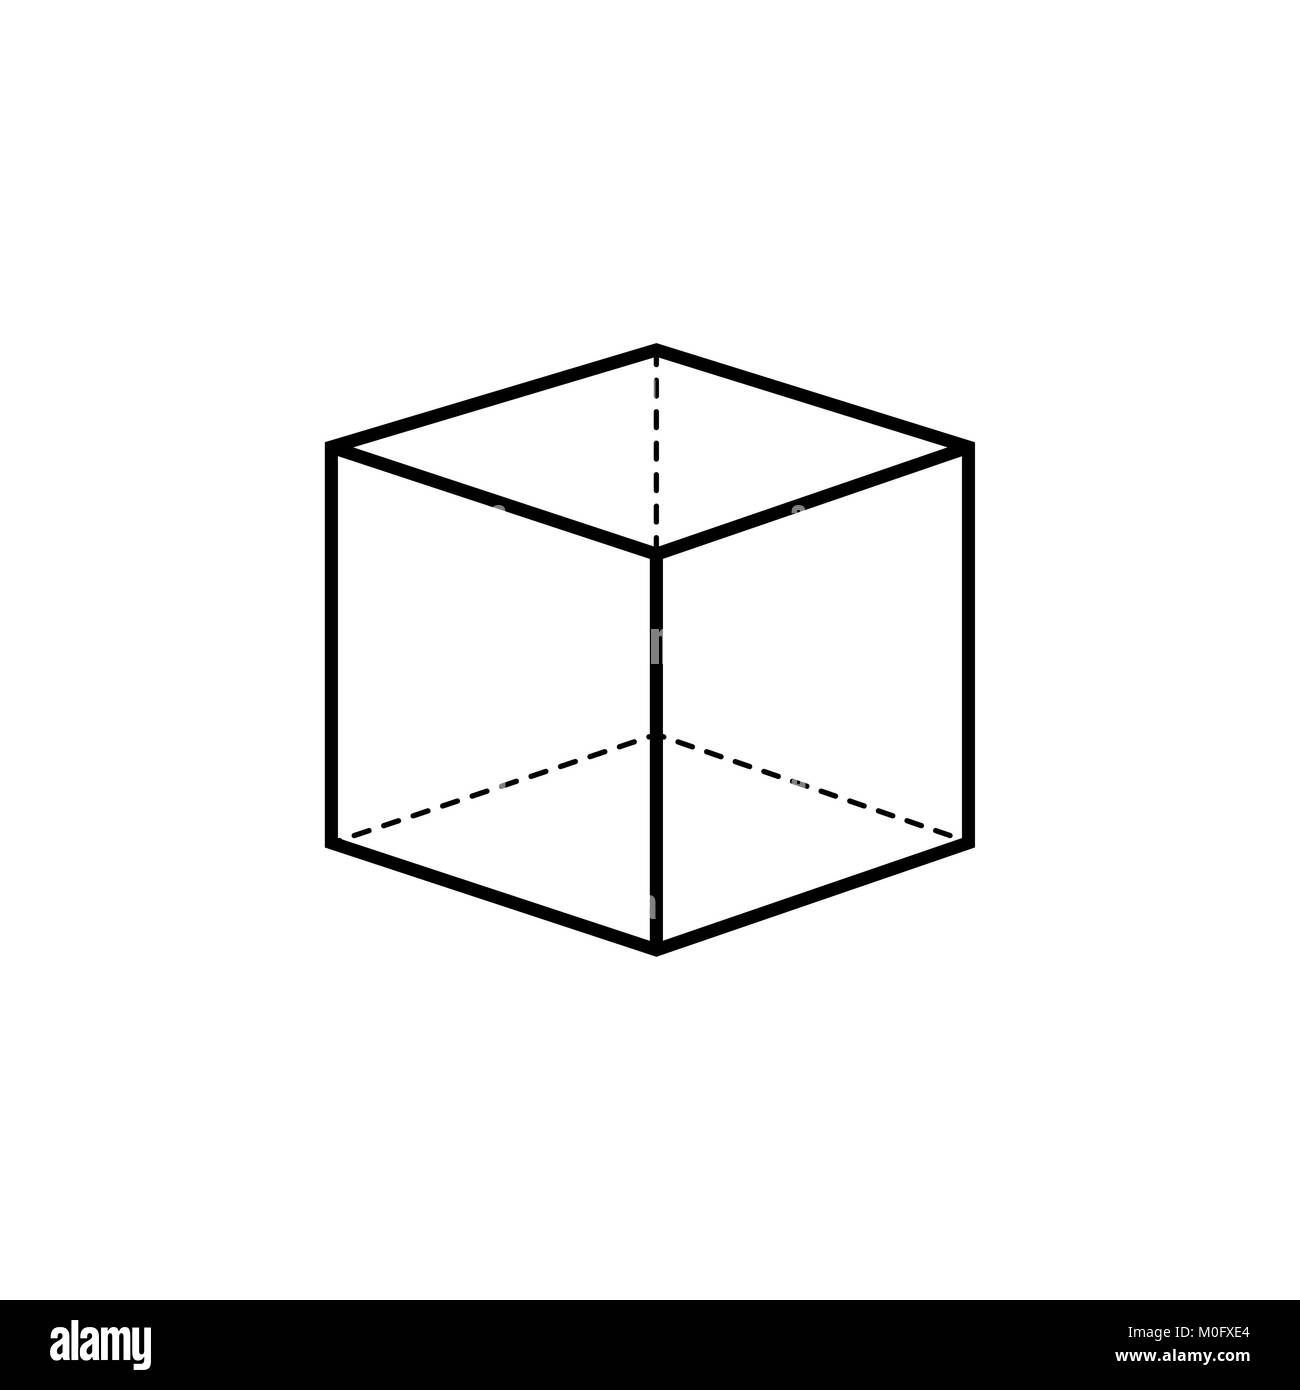 How to Draw 3D Cubes and Freehand Stars